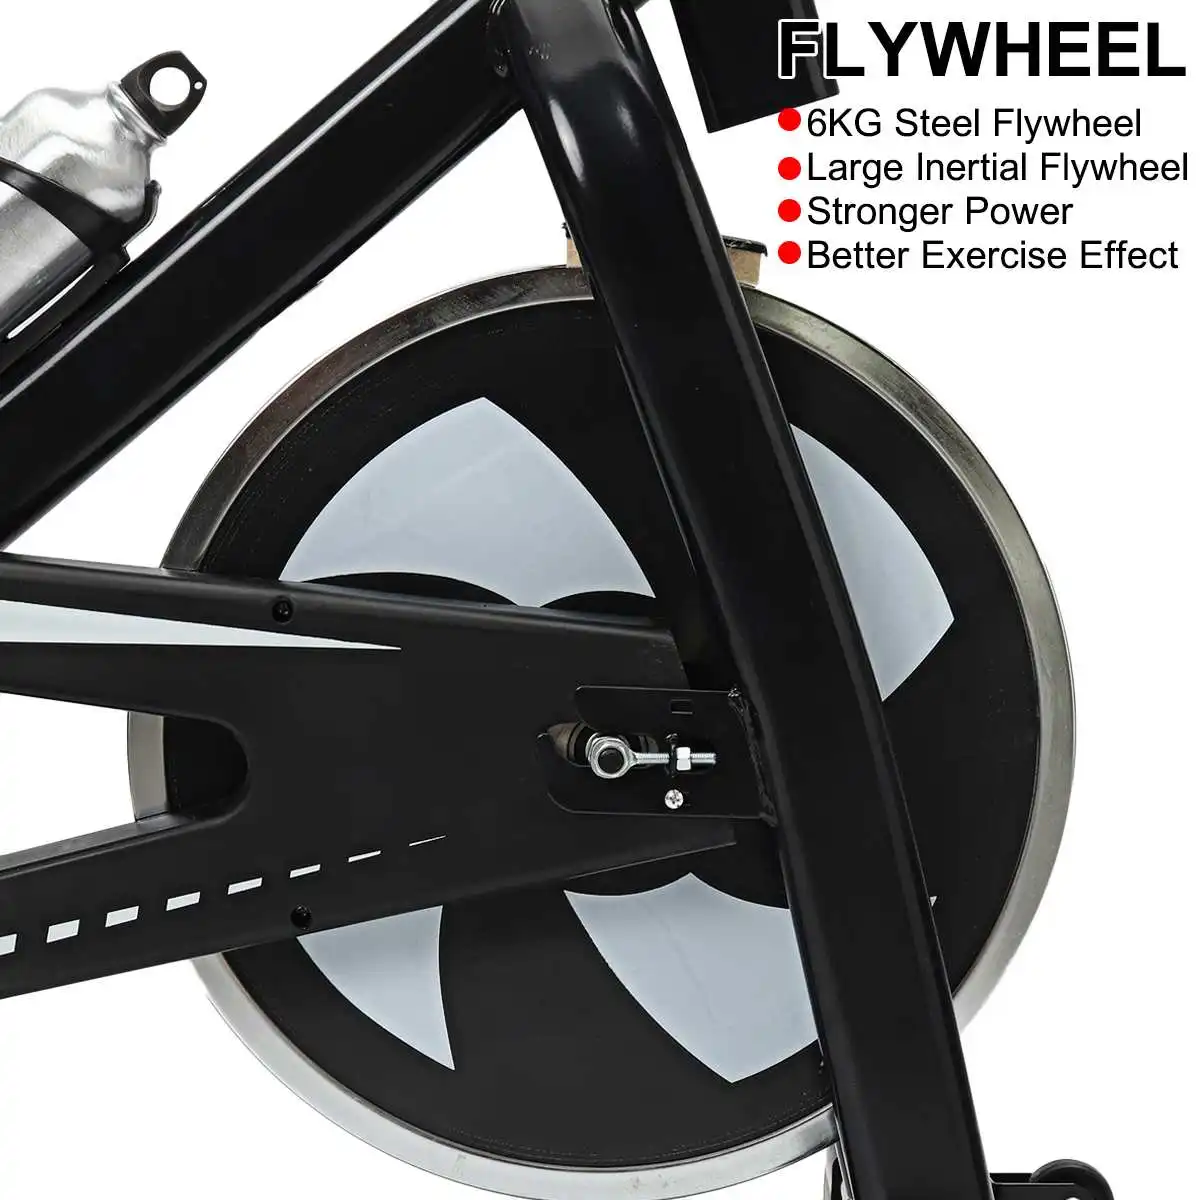 

Exercise Bike Home Ultra-quiet Indoor Weight Loss Pedal Bike Fitness Bike Dynamic Bicycle Fitness Equipment Fittness Cycly Bike